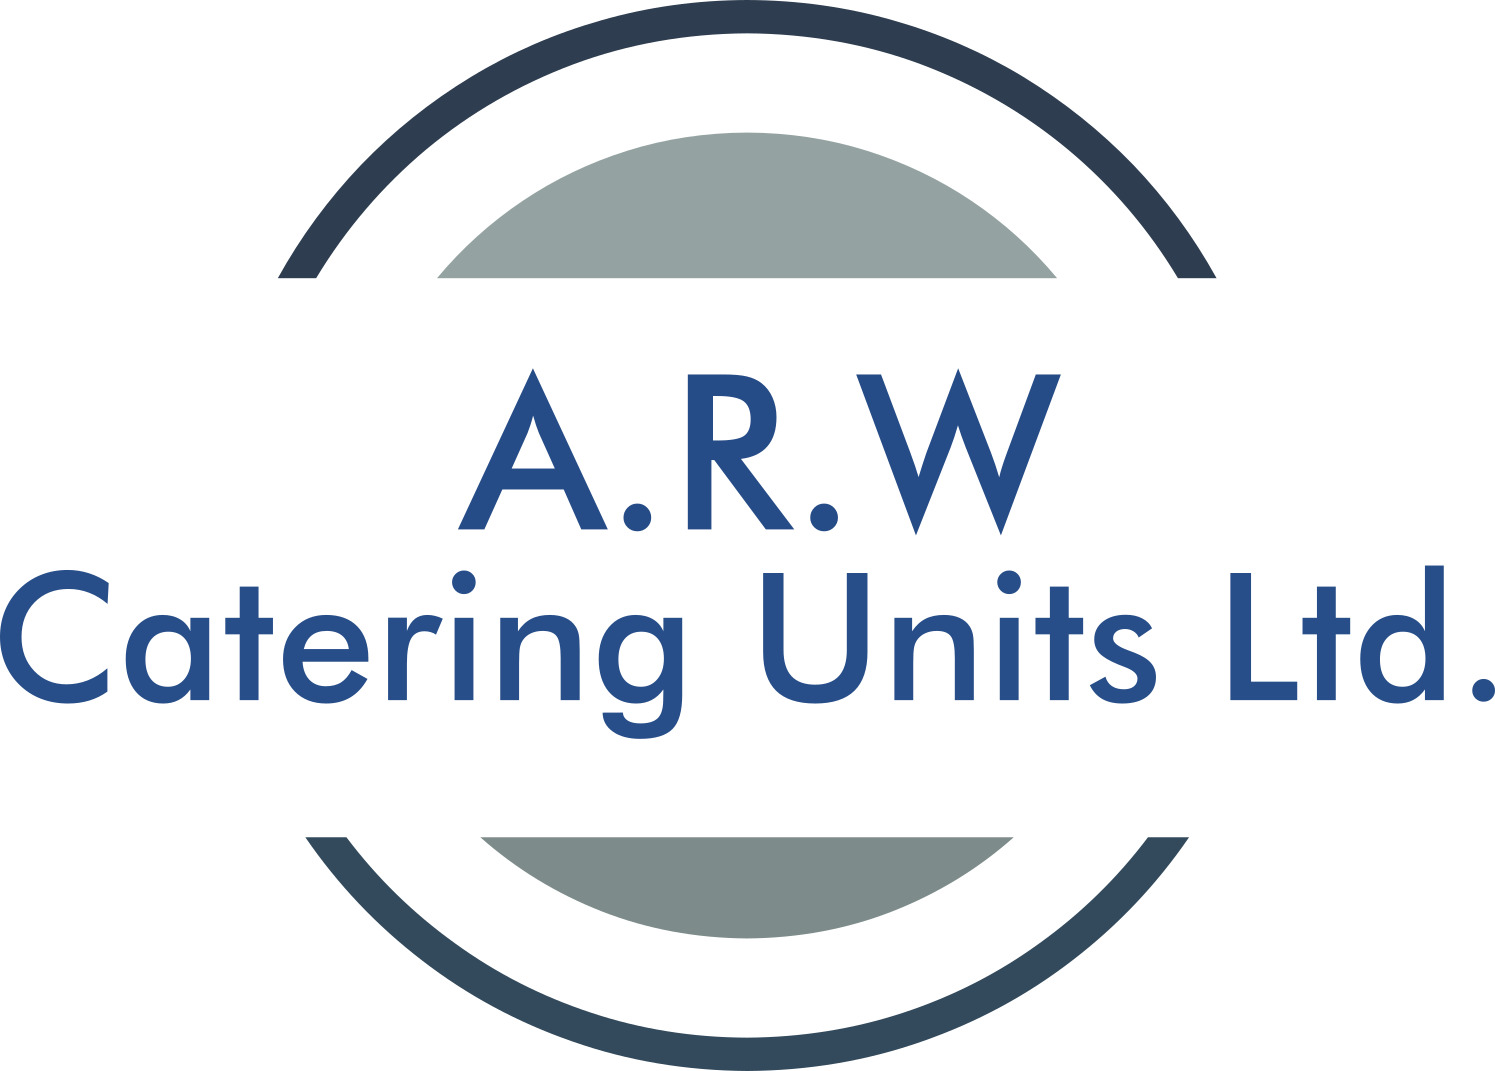 A&R Willis (catering trailers) LTD